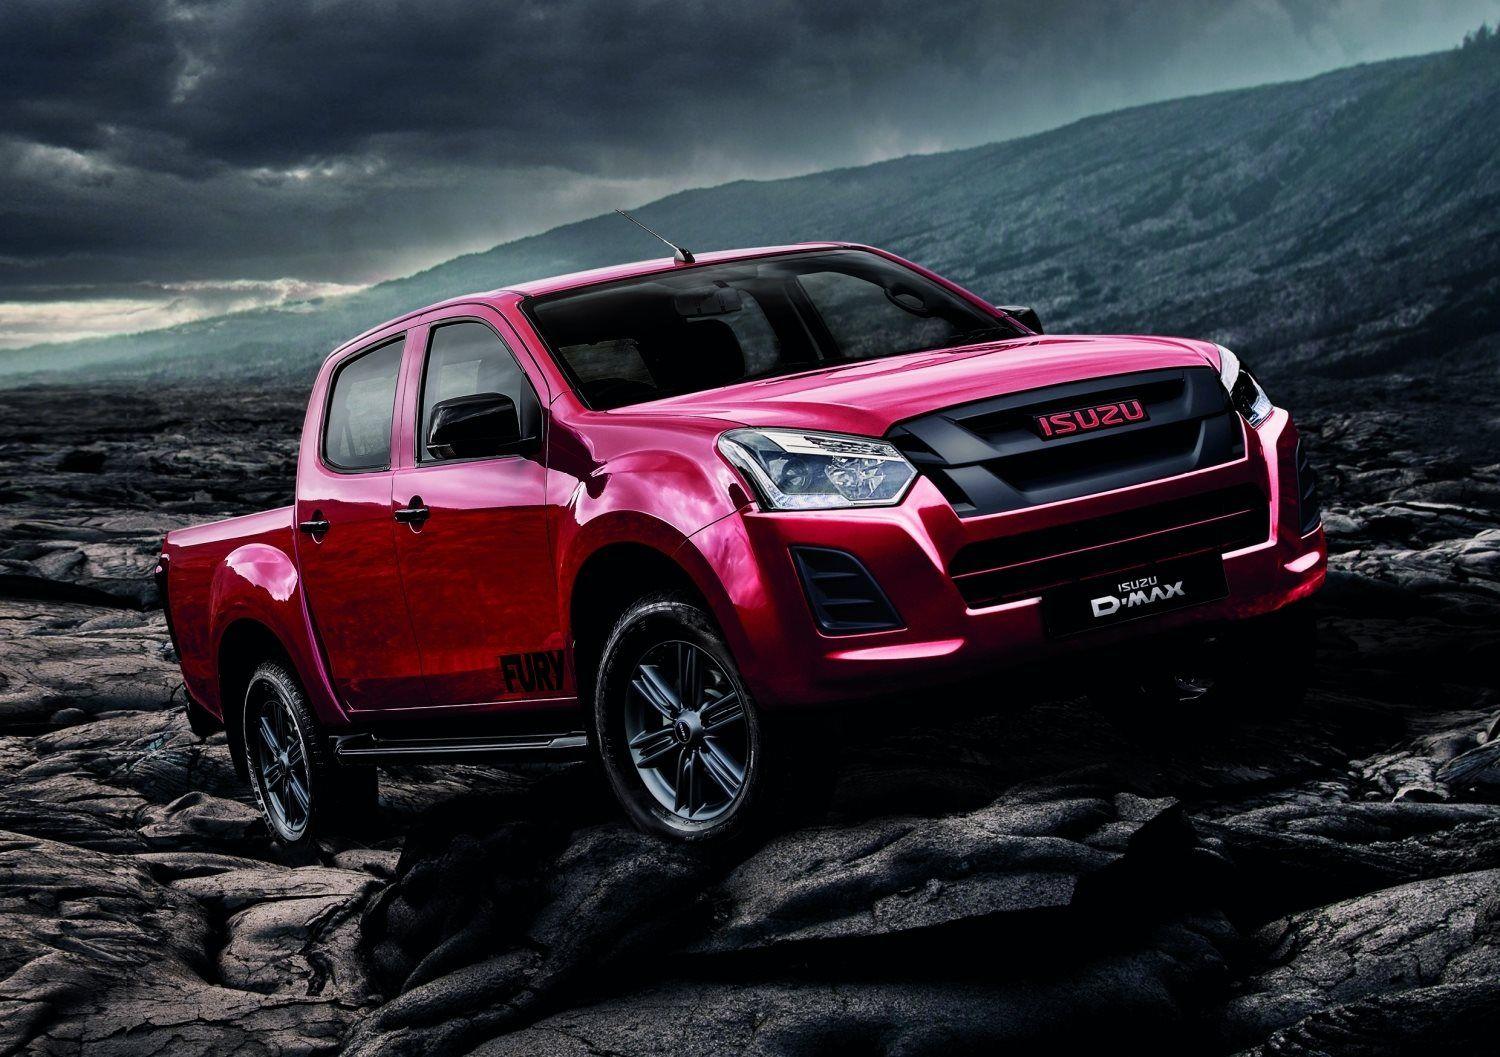 THE NEW ISUZU D-MAX FURY, READY TO BE UNLEASHED